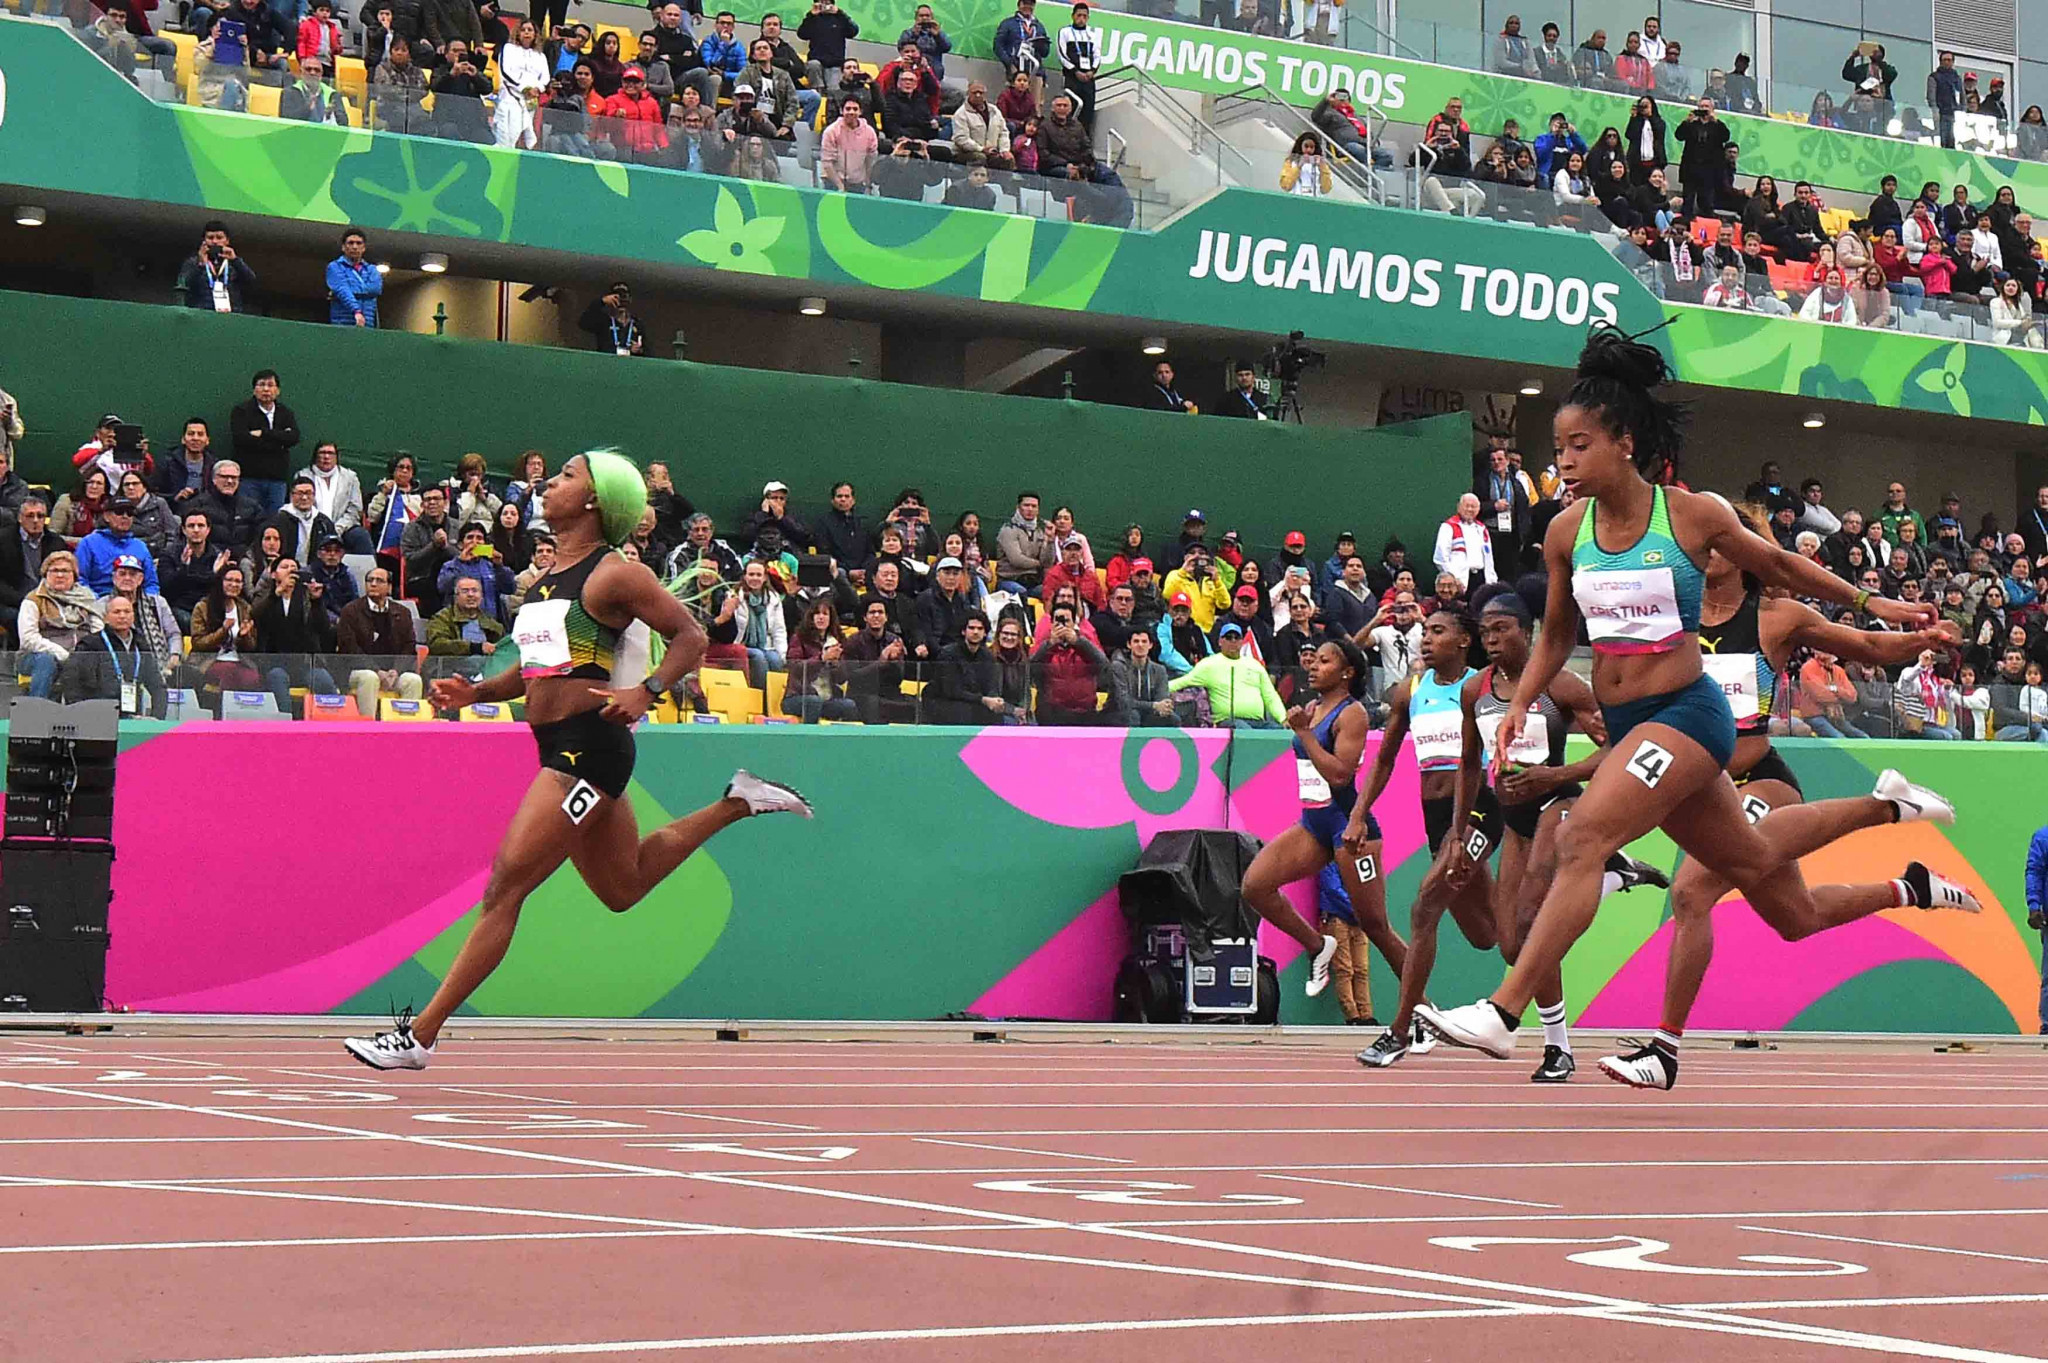 TV Record served as the rightsholder for the Lima 2019 Pan American Games ©Getty Images